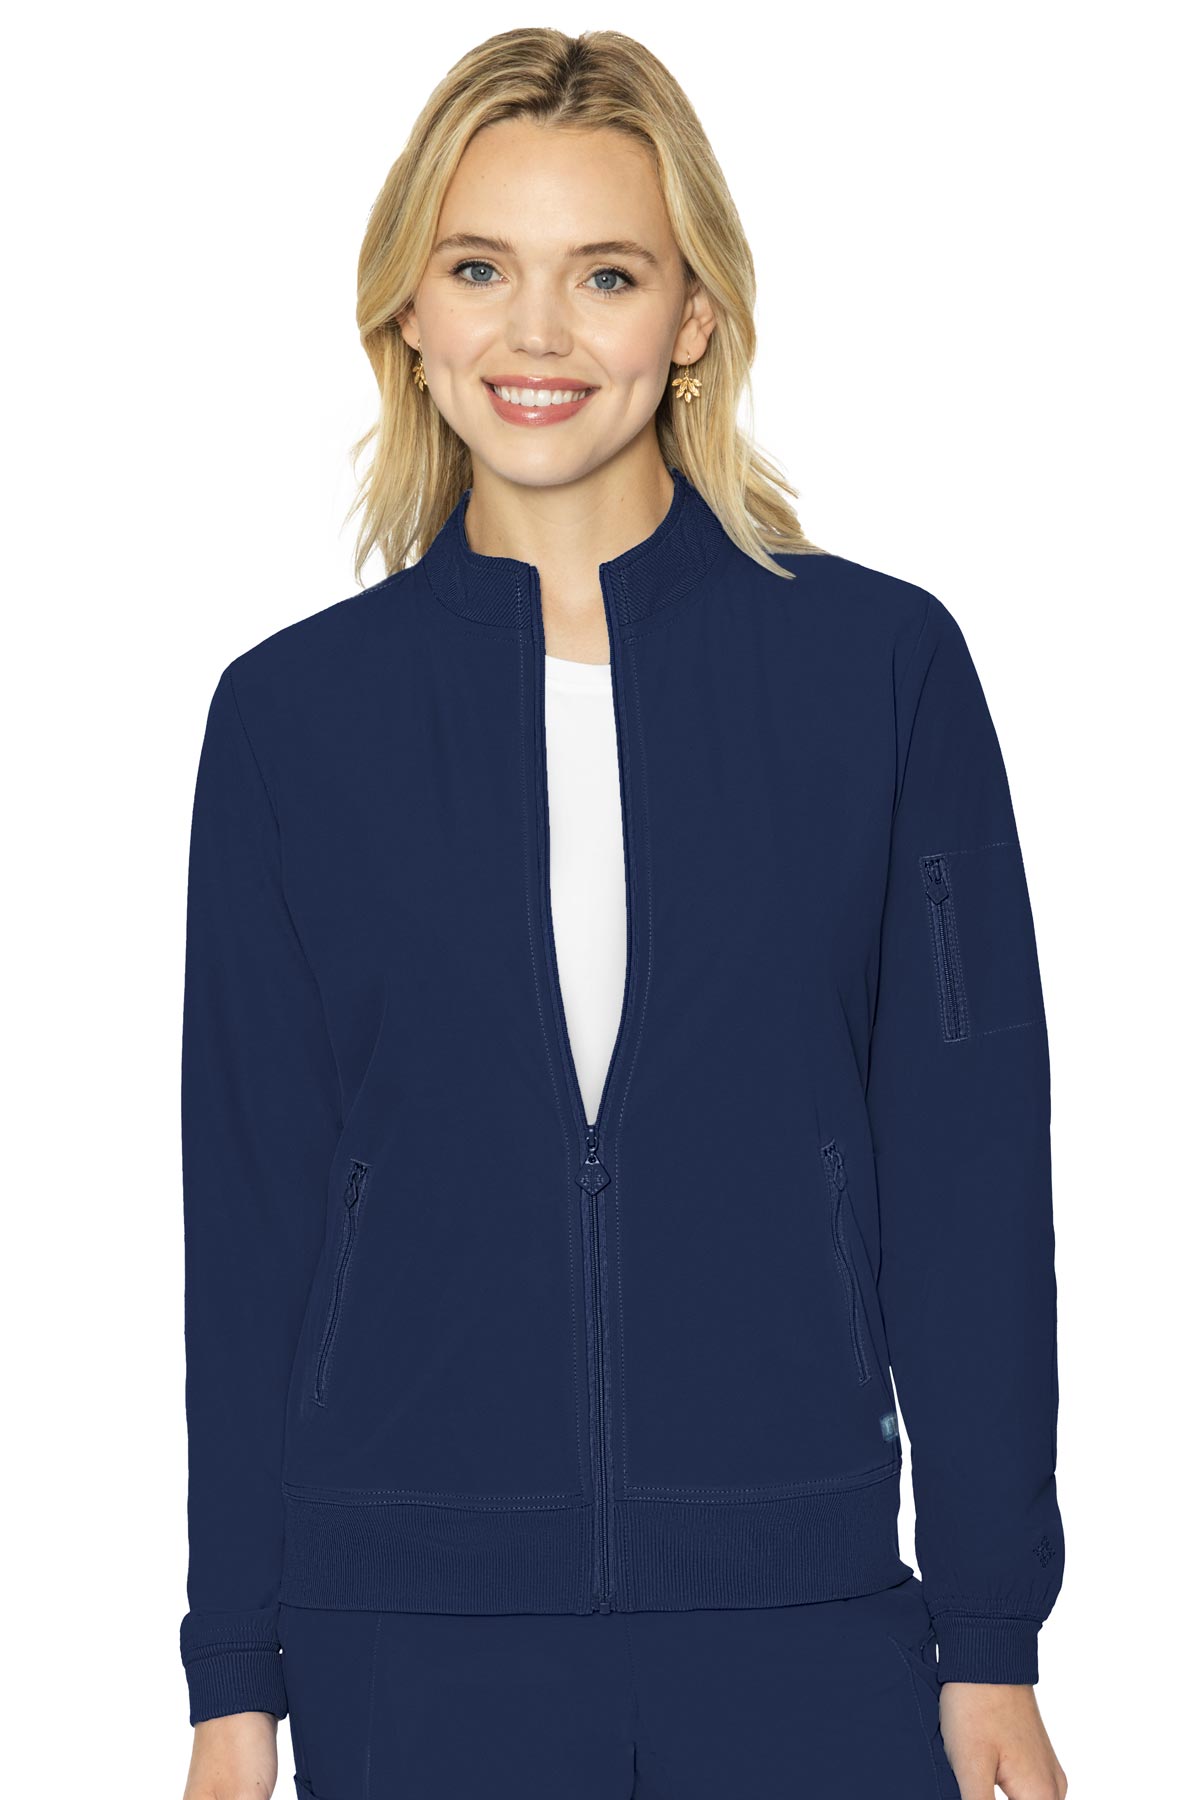 Med Couture Peaches 8674 Women's Full Zip Warm-Up Jacket Navy